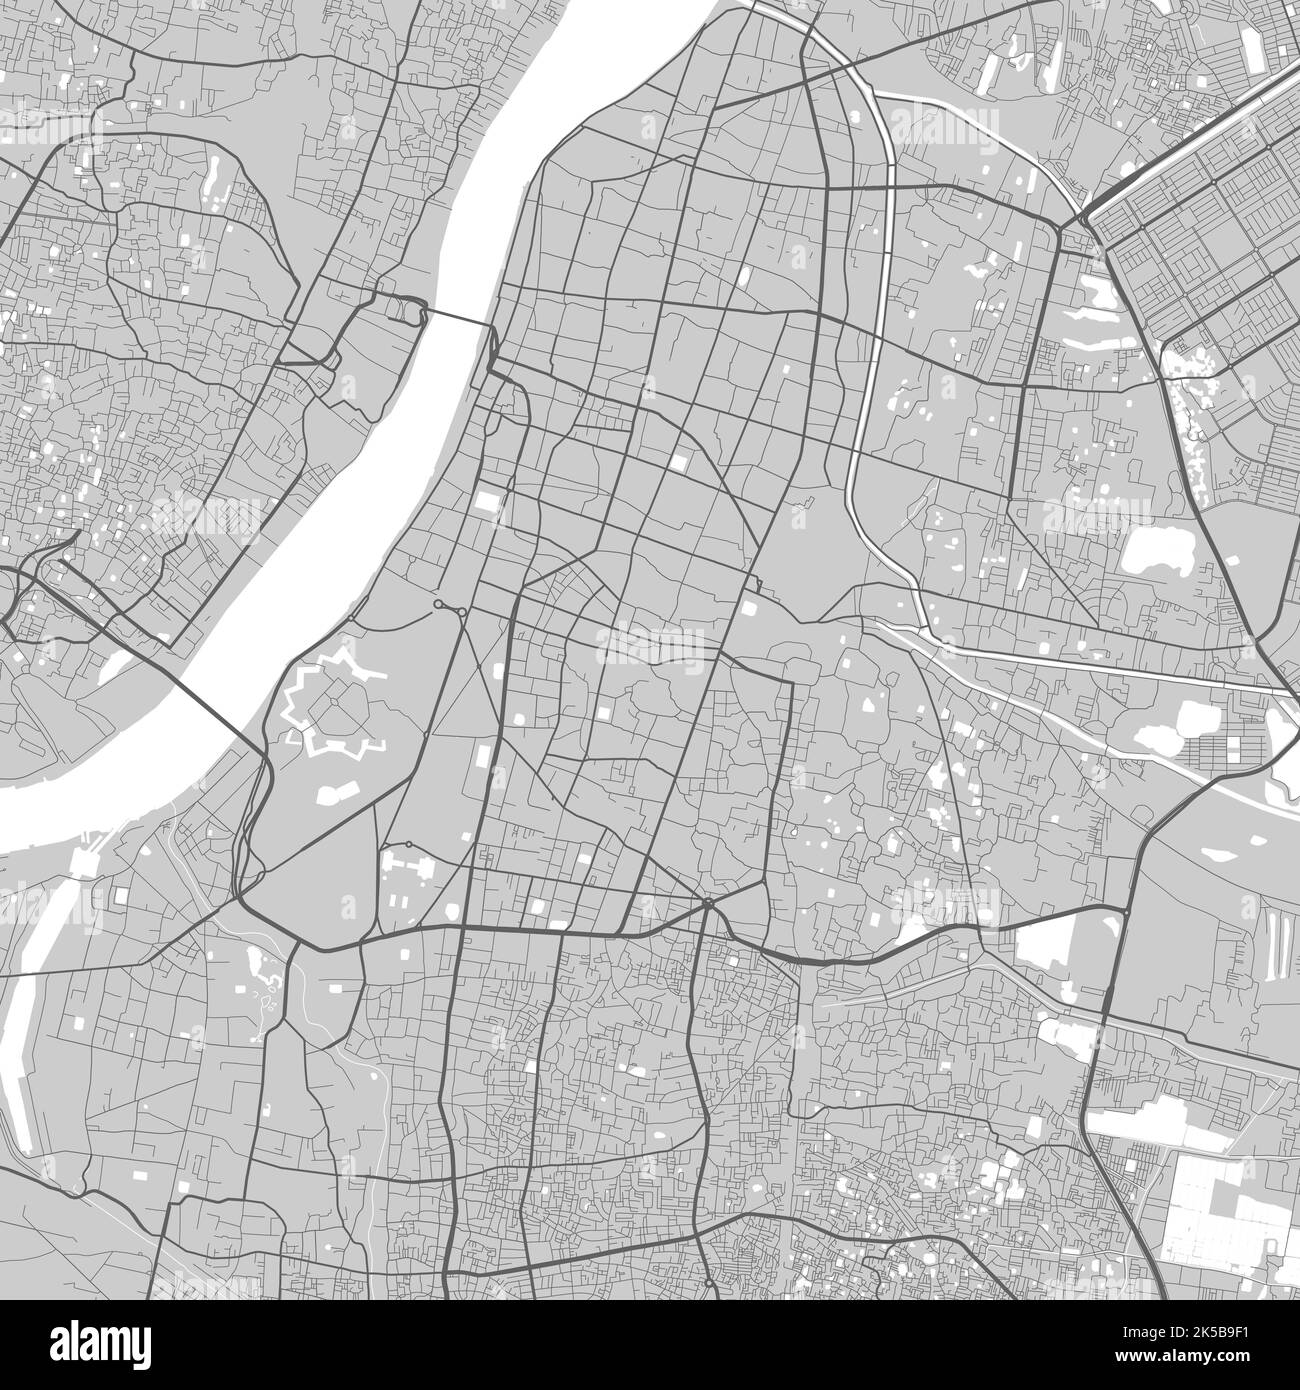 Map of Kolkata city. Urban black and white poster. Road map image with metropolitan city area view. Stock Vector